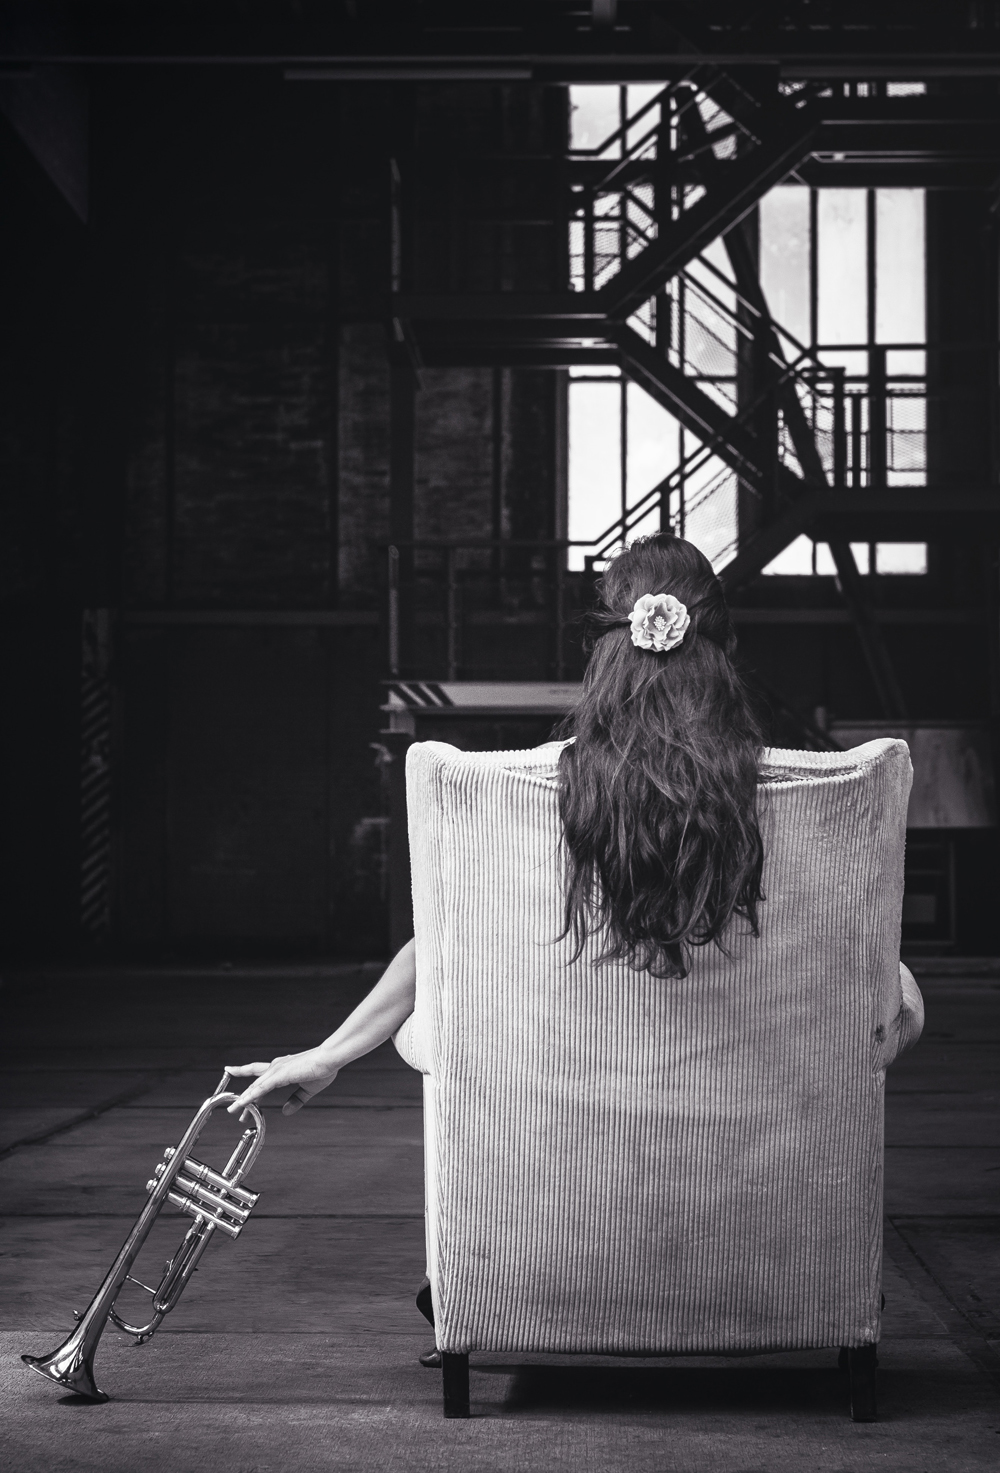 The back of a chair showing the long hair of a woman sitting in it and holding a trumpet. Photo by Alex via Unsplash *(https://unsplash.com/@worthyofelegance)